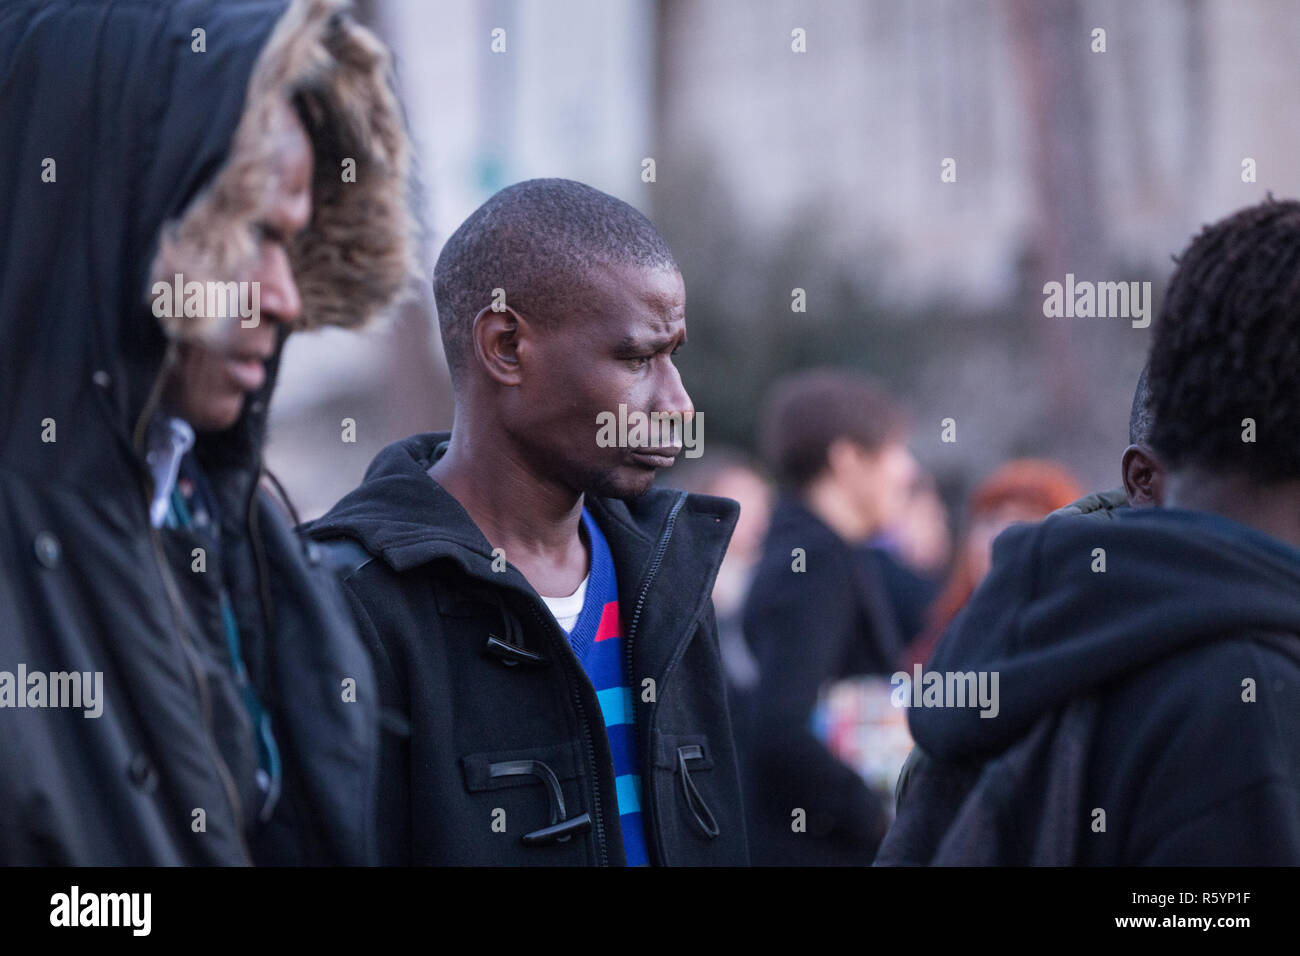 Roma, Italy. 01st Dec, 2018. Demonstration in Rome to protest against the social policies of the government and the Municipality of Rome Credit: Matteo Nardone/Pacific Press/Alamy Live News Stock Photo